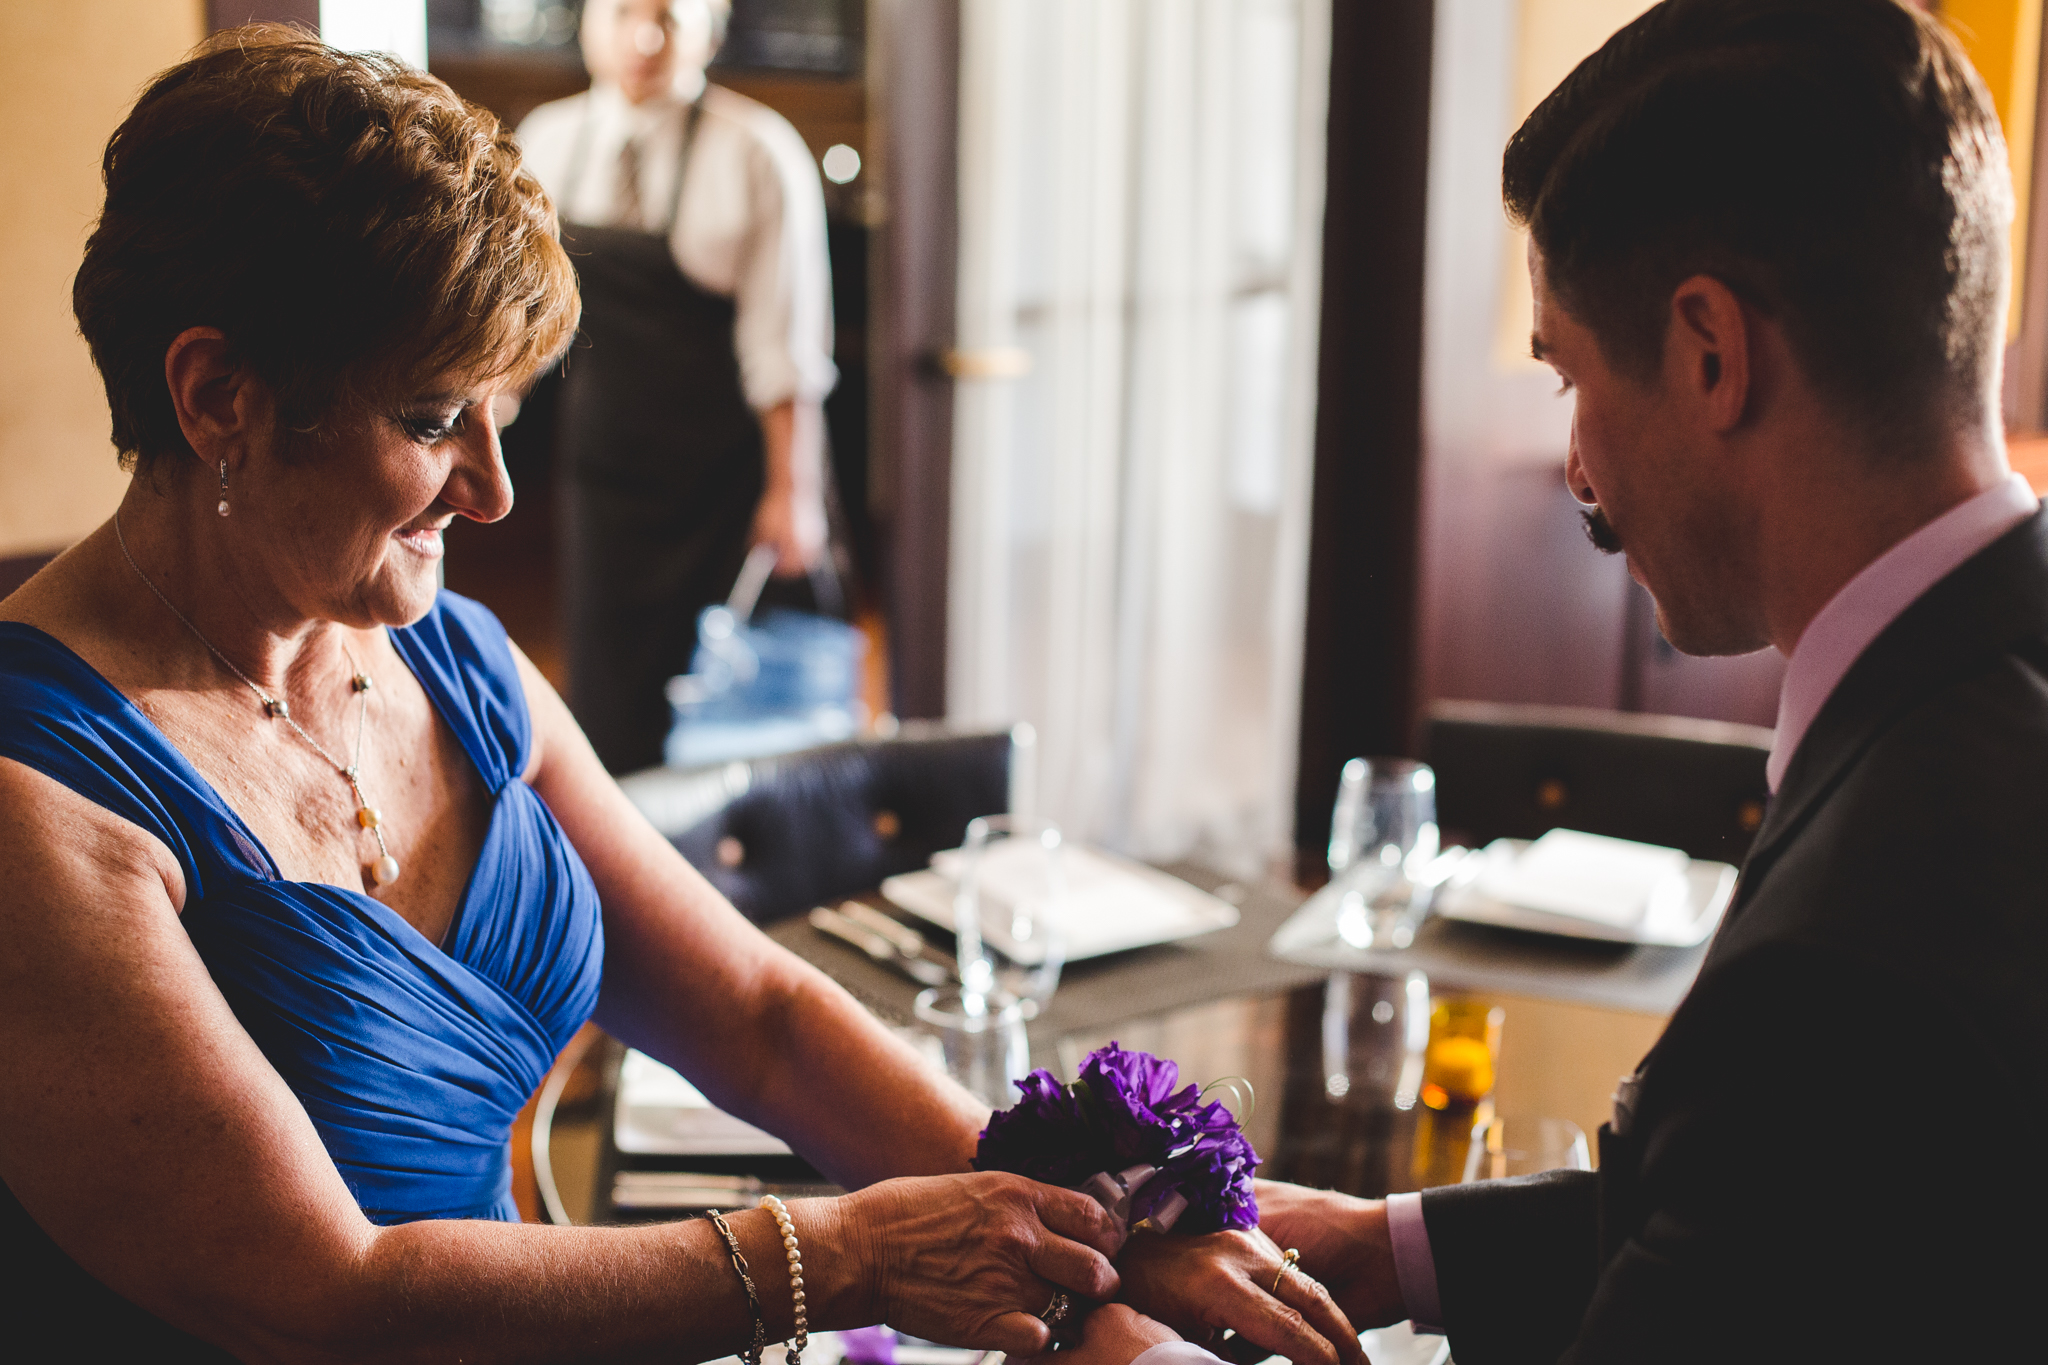 chad groom puts corsage onto mother of bride